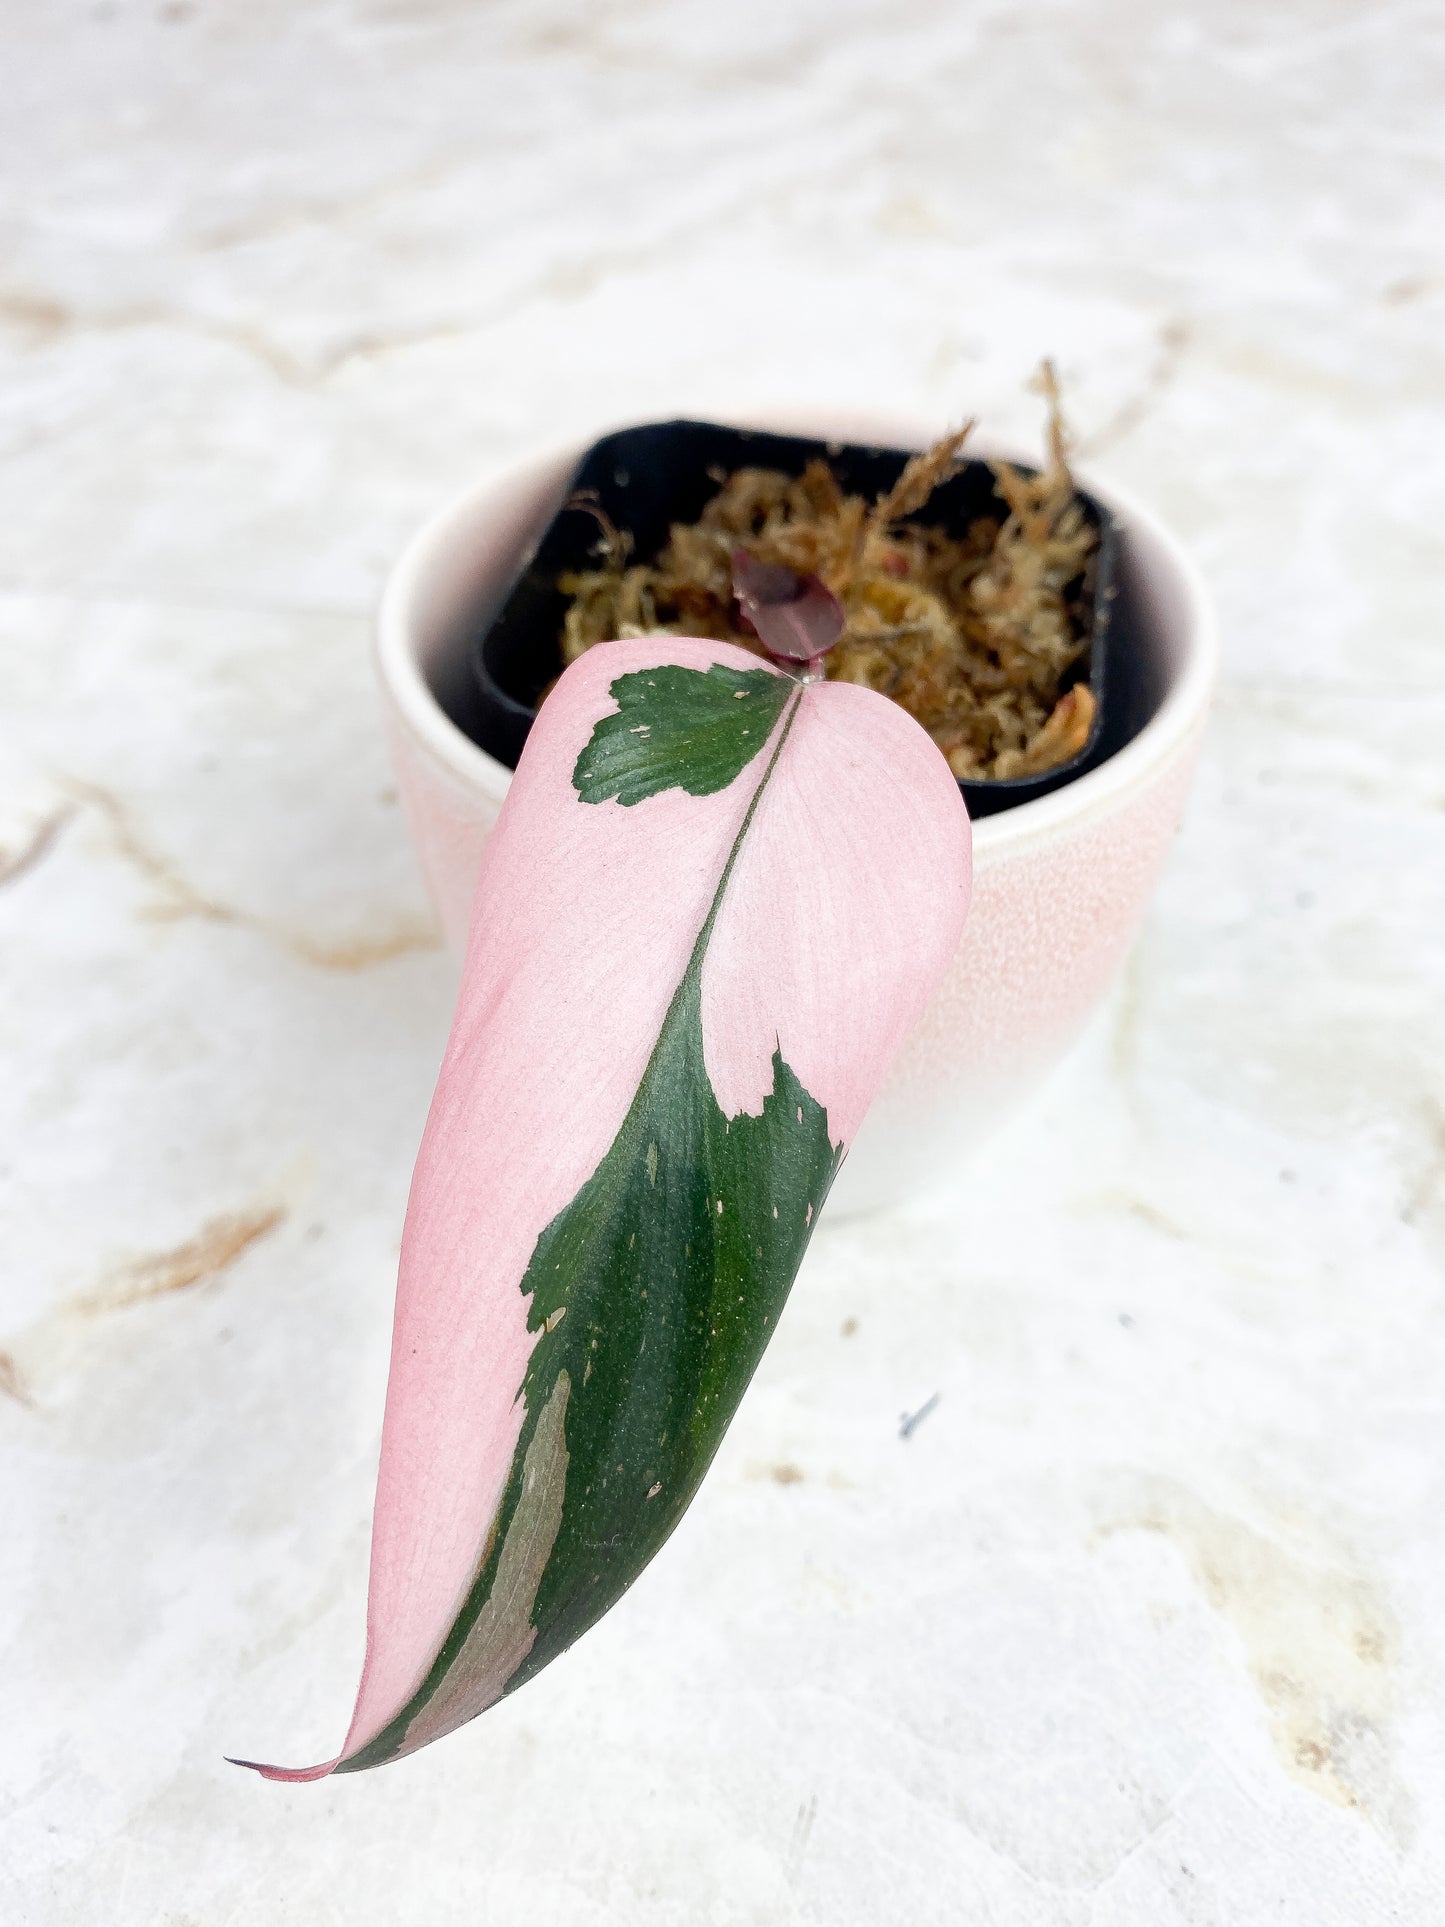 Philodendron Pink Princess Highly Variegated Rooting Cutting